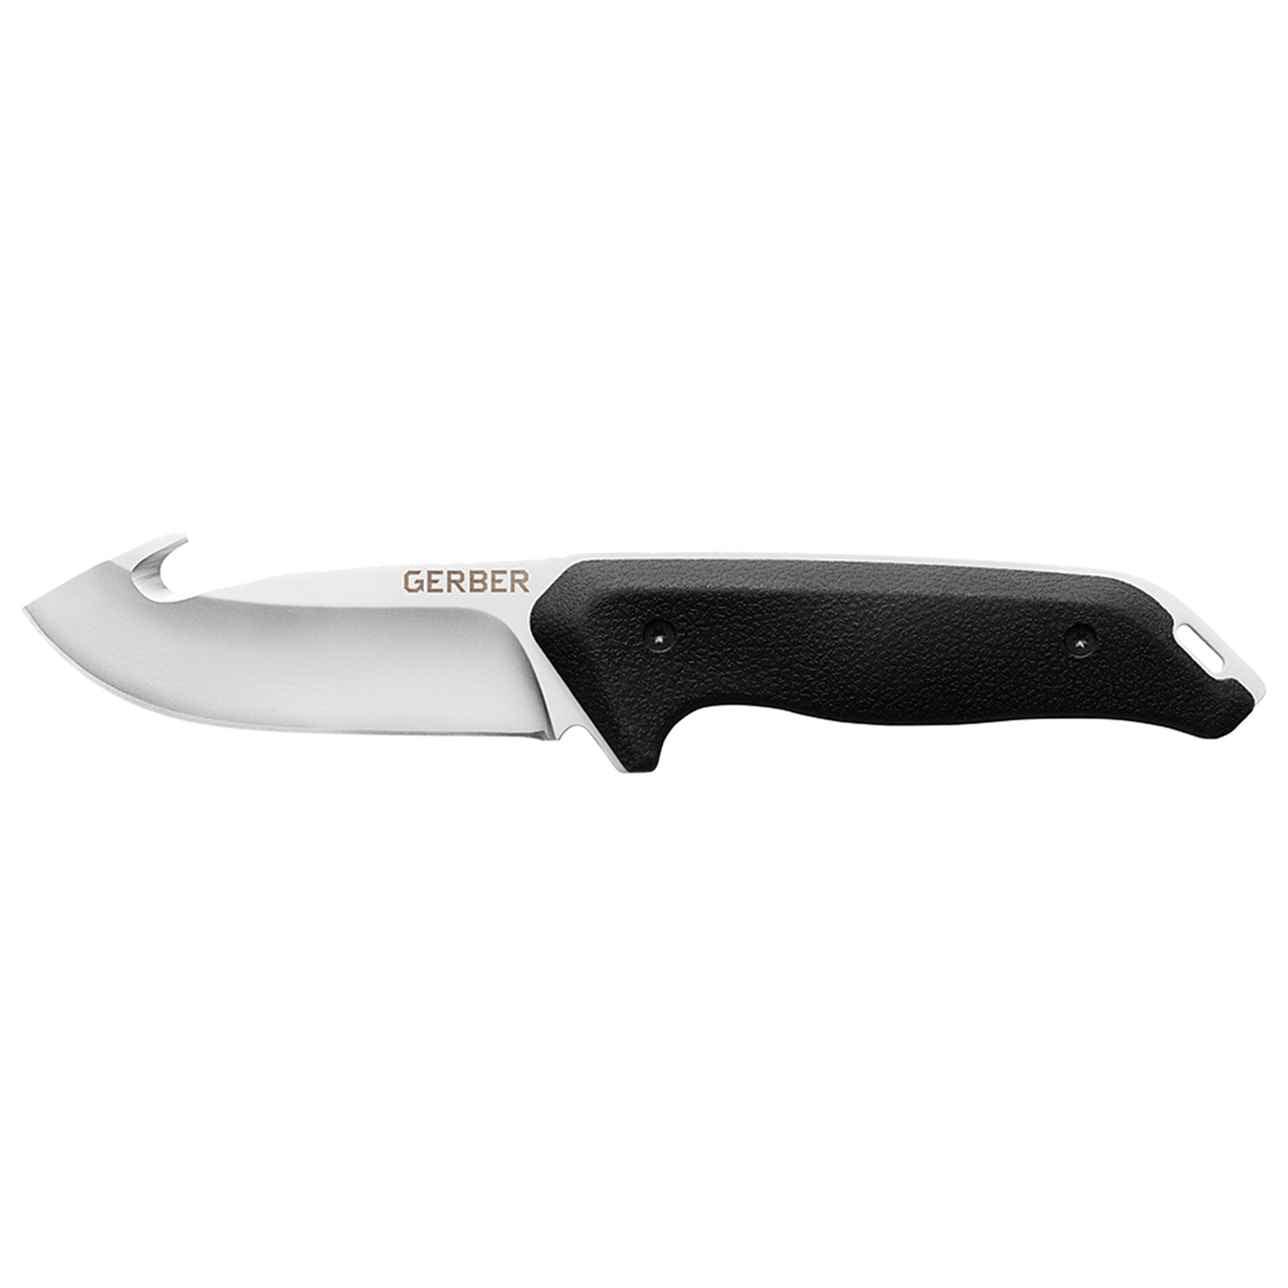 Gerber Moment Guthook Fixed Knife - Knives.mx